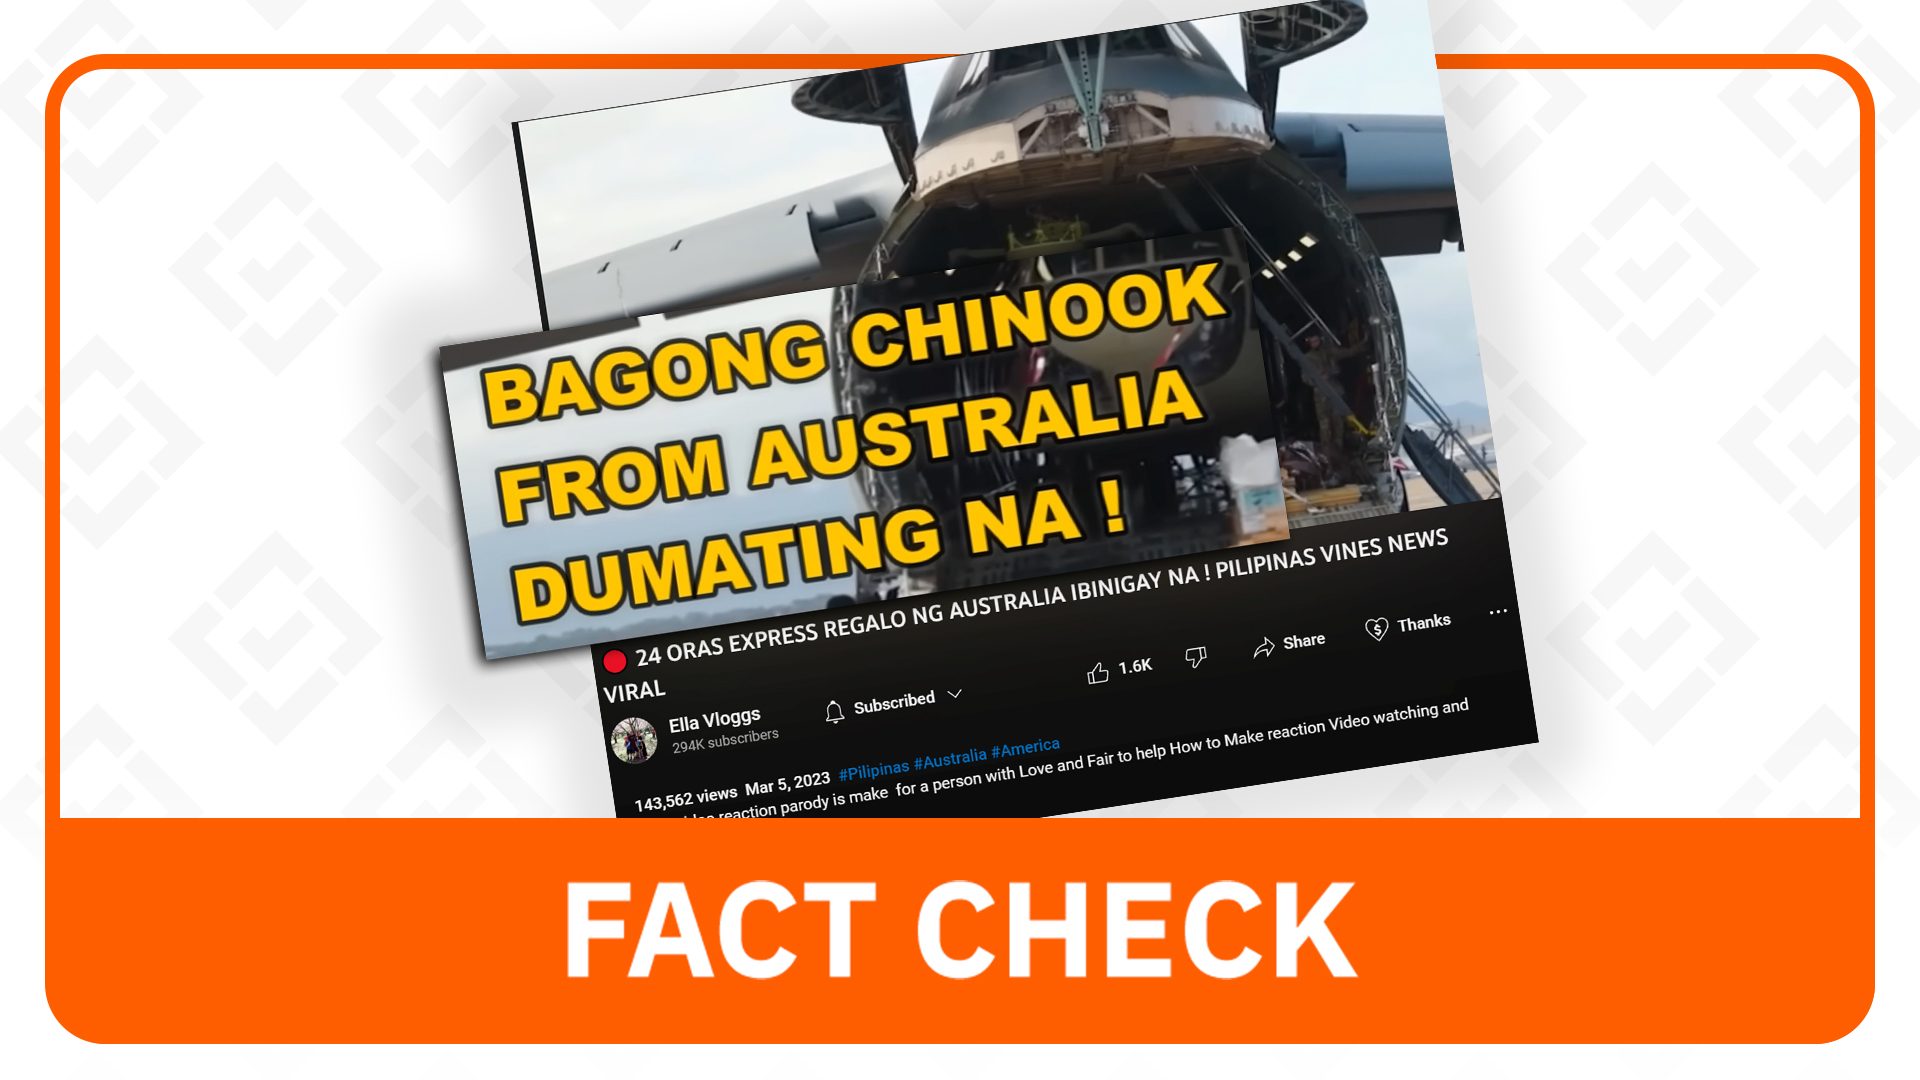 FACT CHECK: Australia didn’t donate a Chinook helicopter to the Philippines